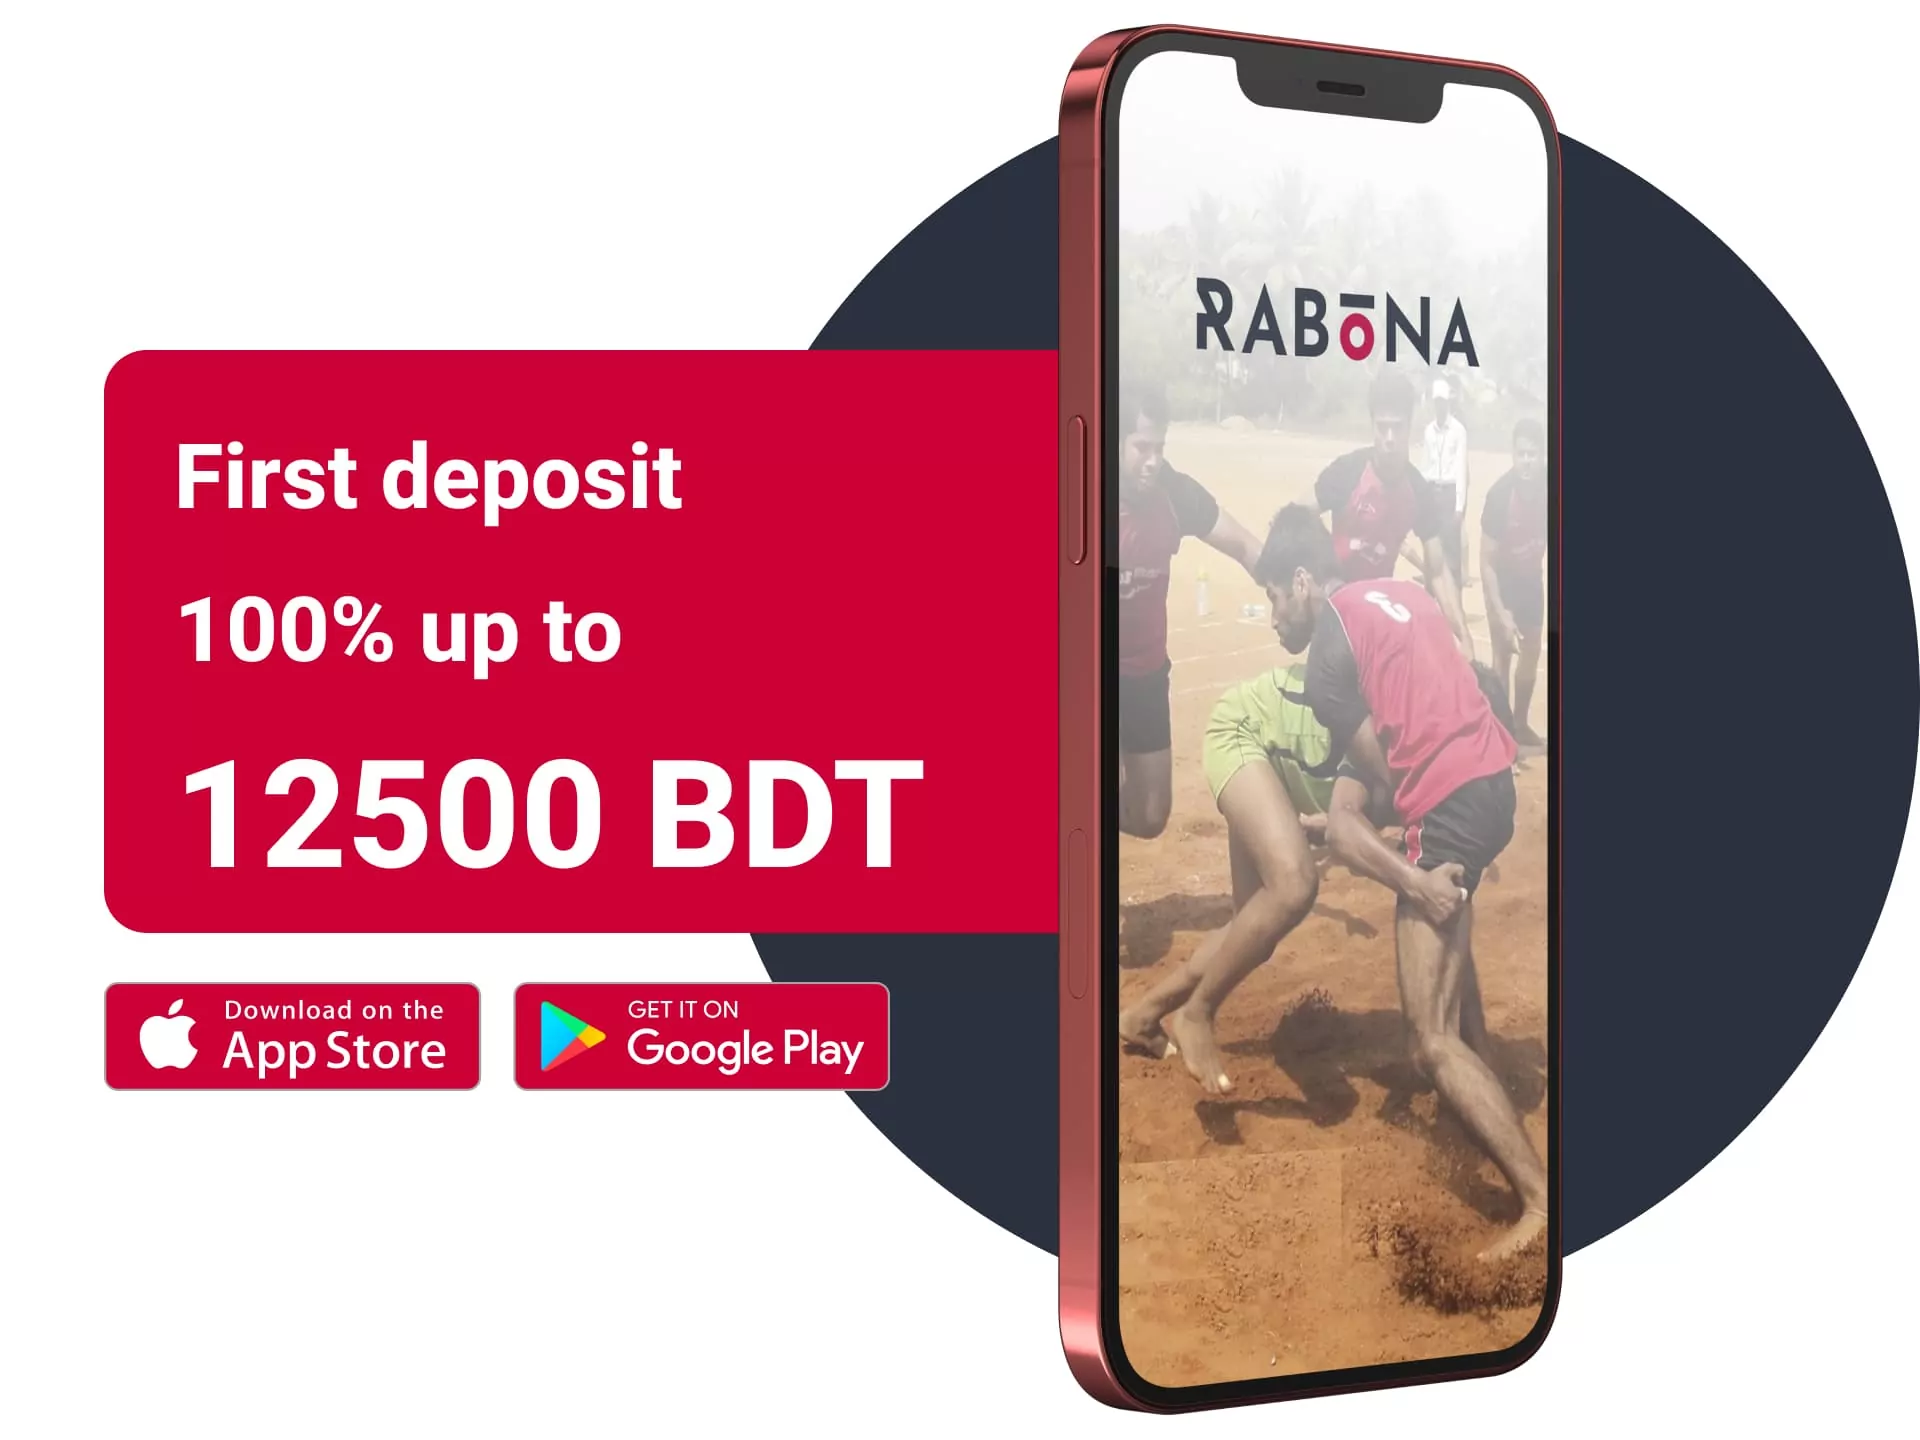 Rabona with In-Play betting and welcome bonus up to 12,500 BDT accepts bets on kabaddi.